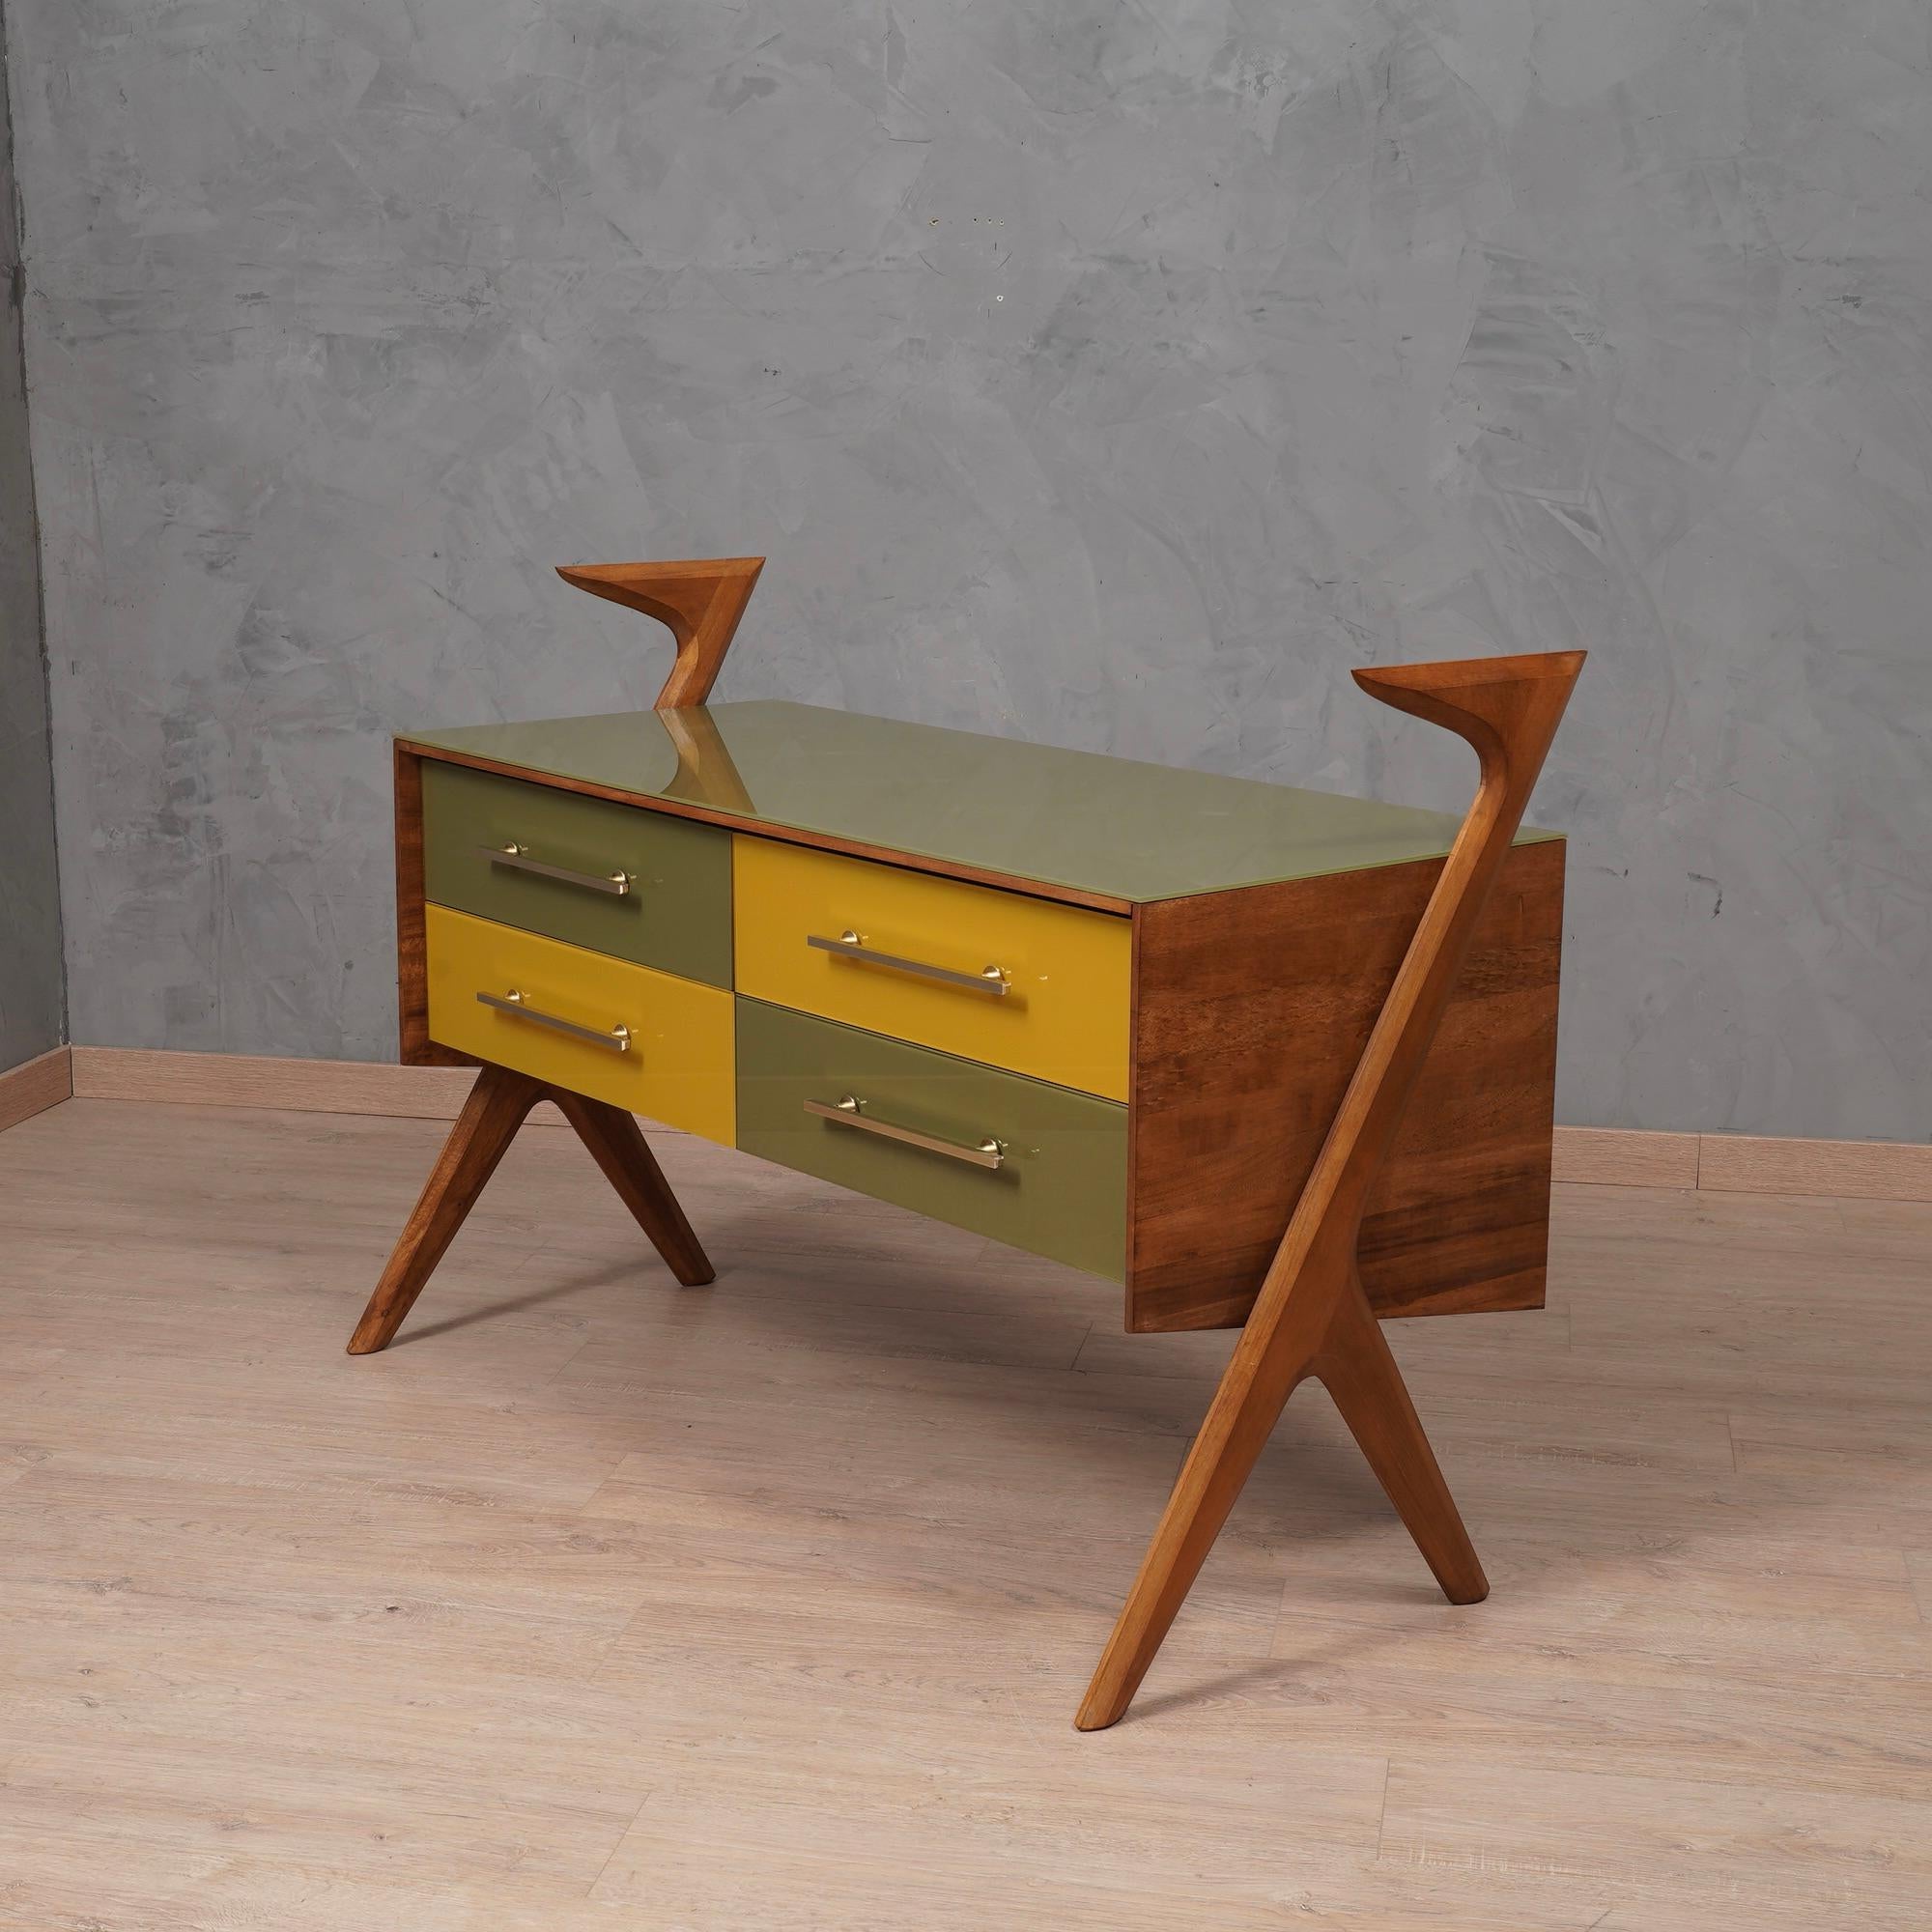 Very special design for this all-Italian chest of drawers in walnut wood and yellow and dove gray lacquered glass. Matching colors with a very fine taste.

The chest of drawers is formed by a central body which contains four drawers, stacked two by